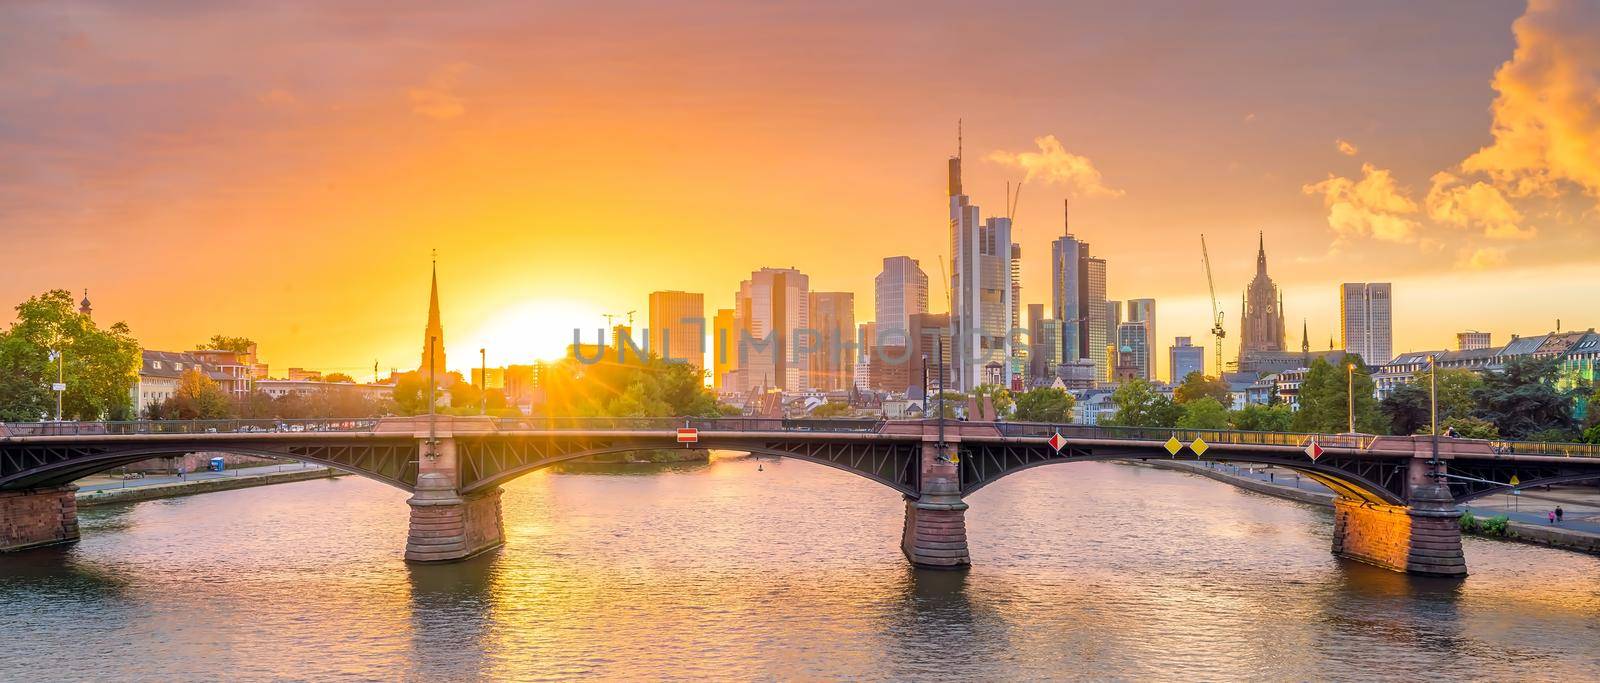 View of Frankfurt city skyline in Germany at sunset by f11photo